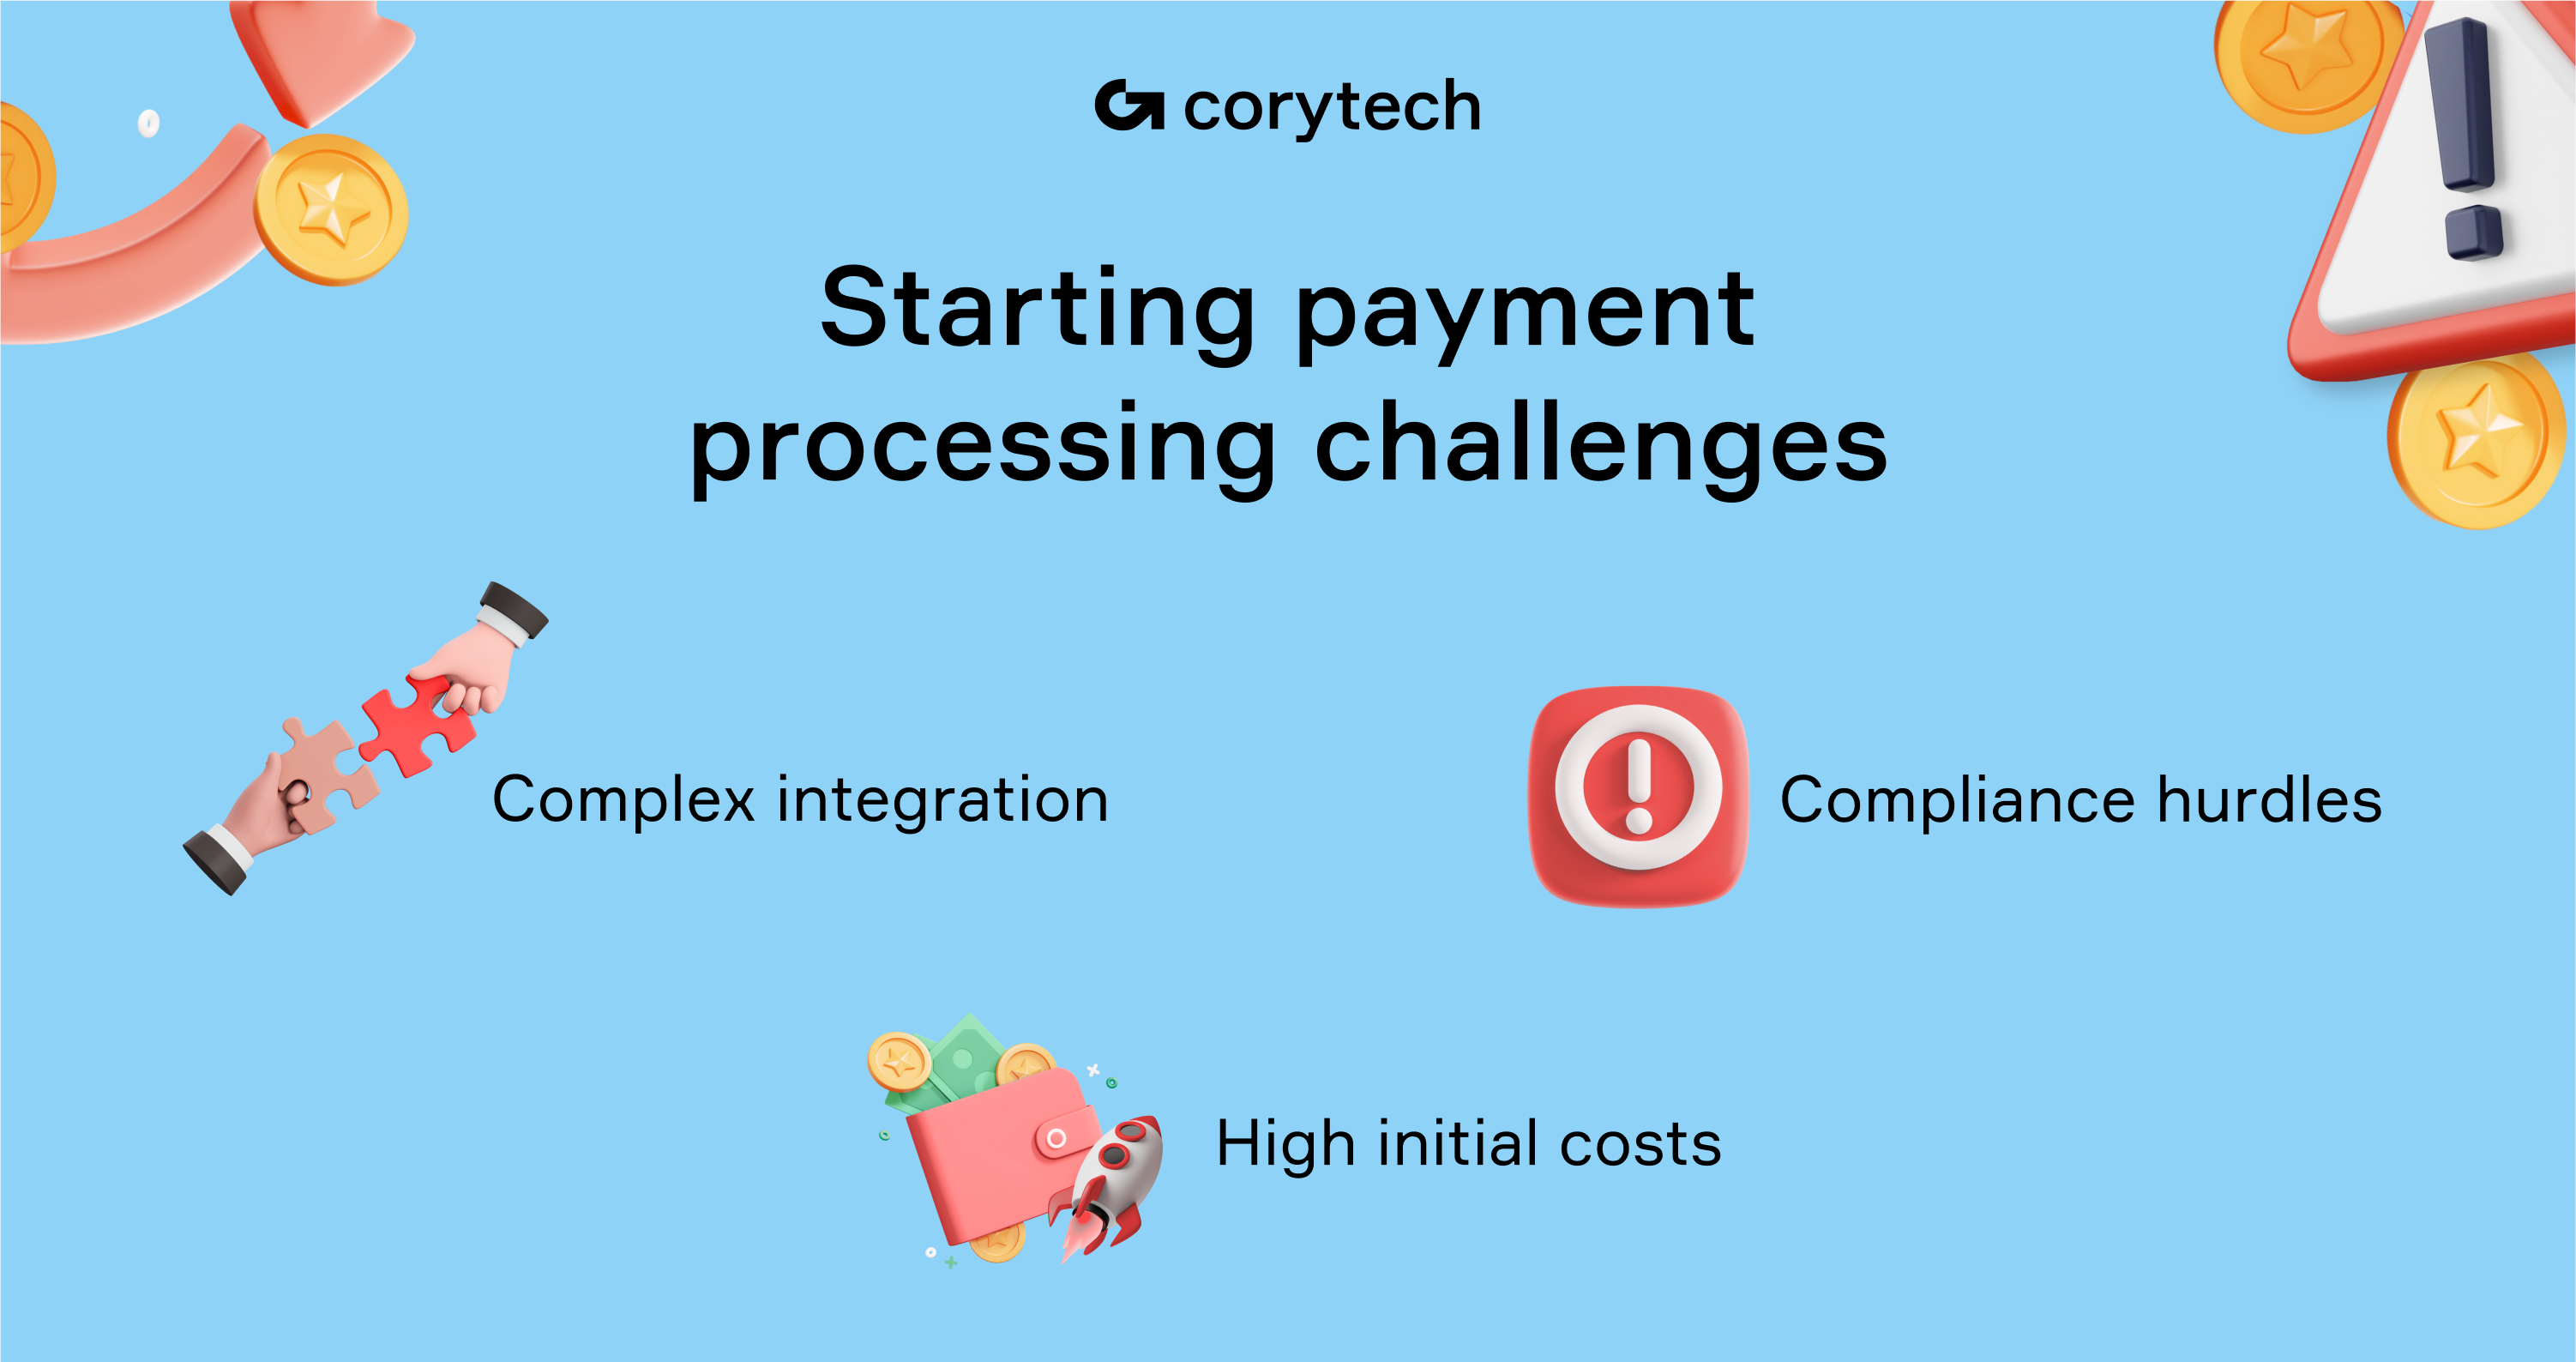 Starting payment processing challenges